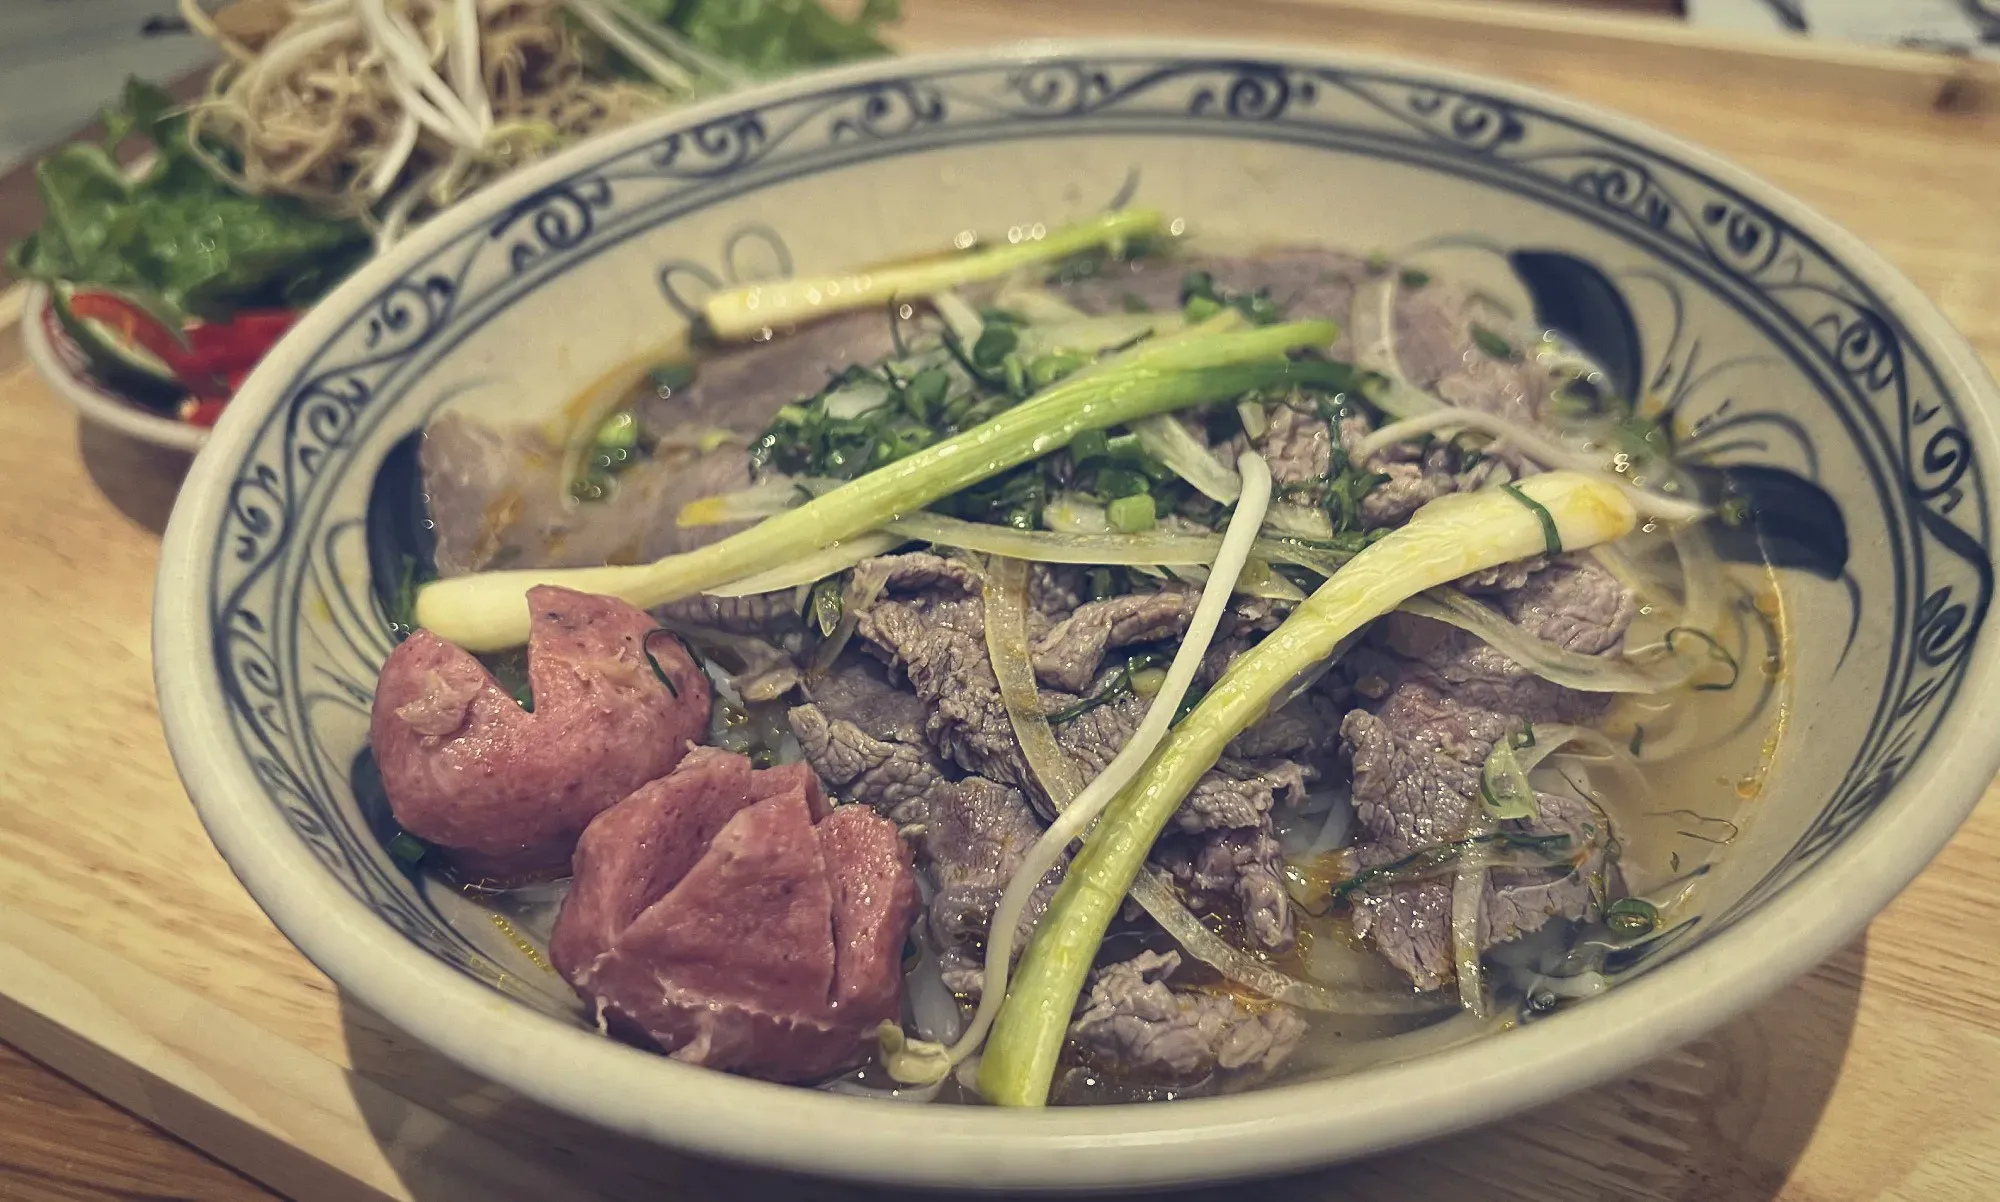 Bowl of Bún bò Huế with garnishes in the background.